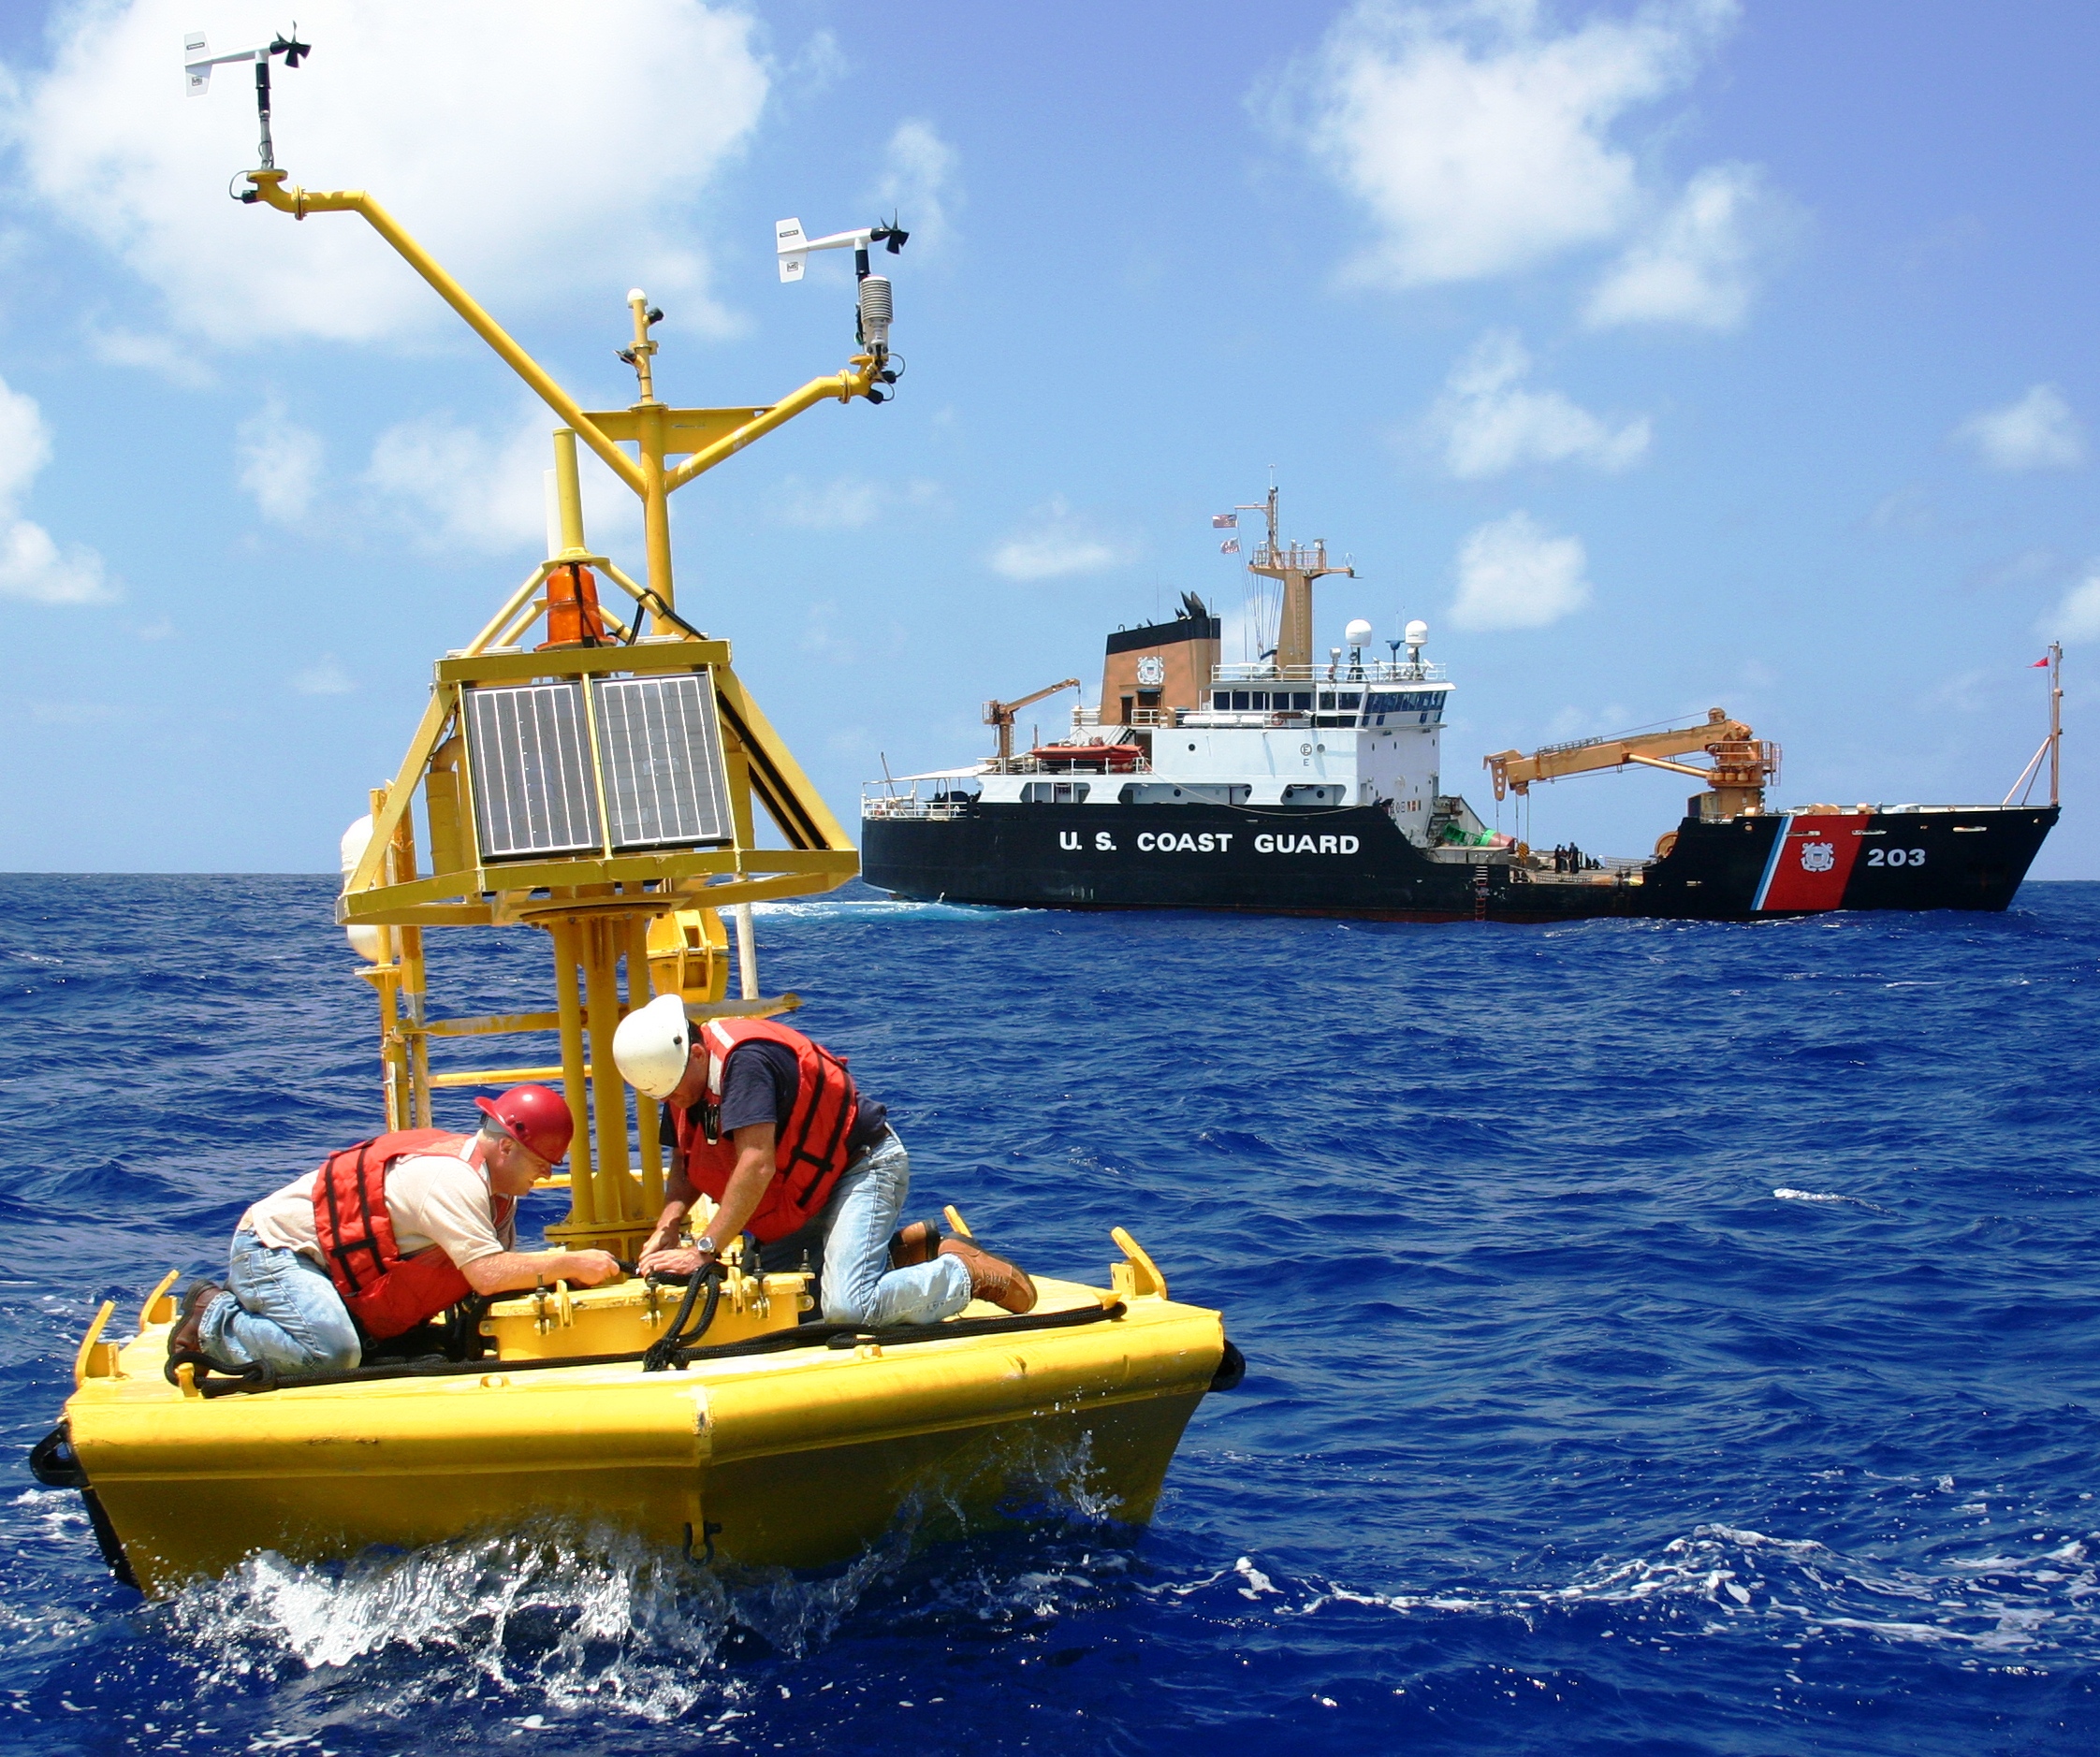 Workers performing maintenance of an ocean buoy at sea with a large ship in the background